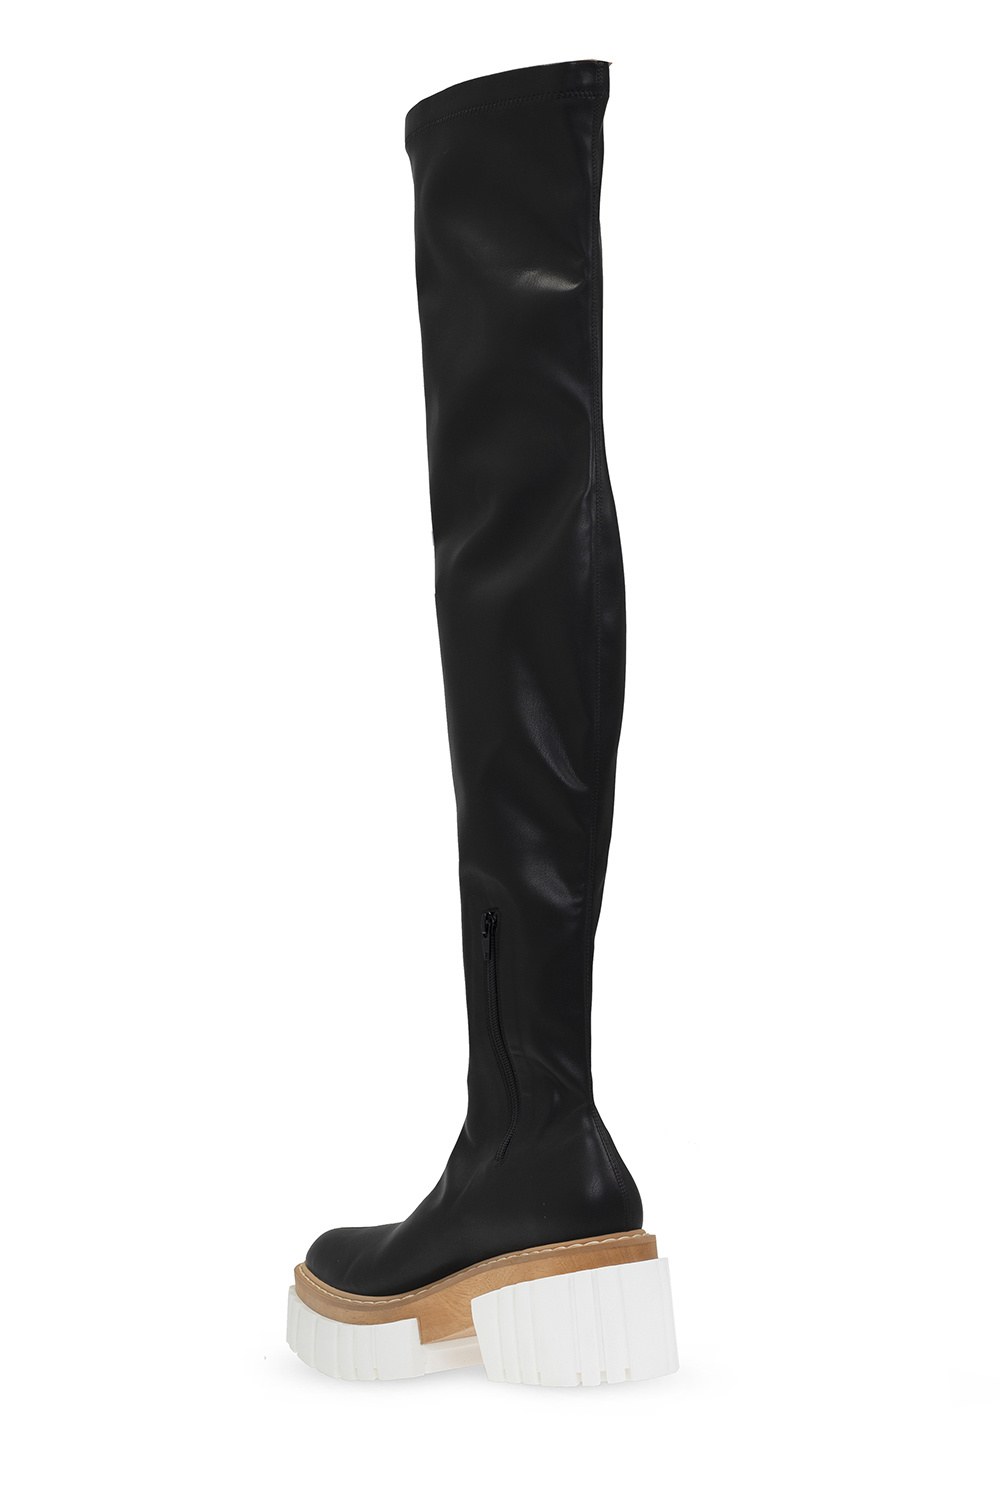 stella One-Piece McCartney ‘Emilie’ over-the-knee boots